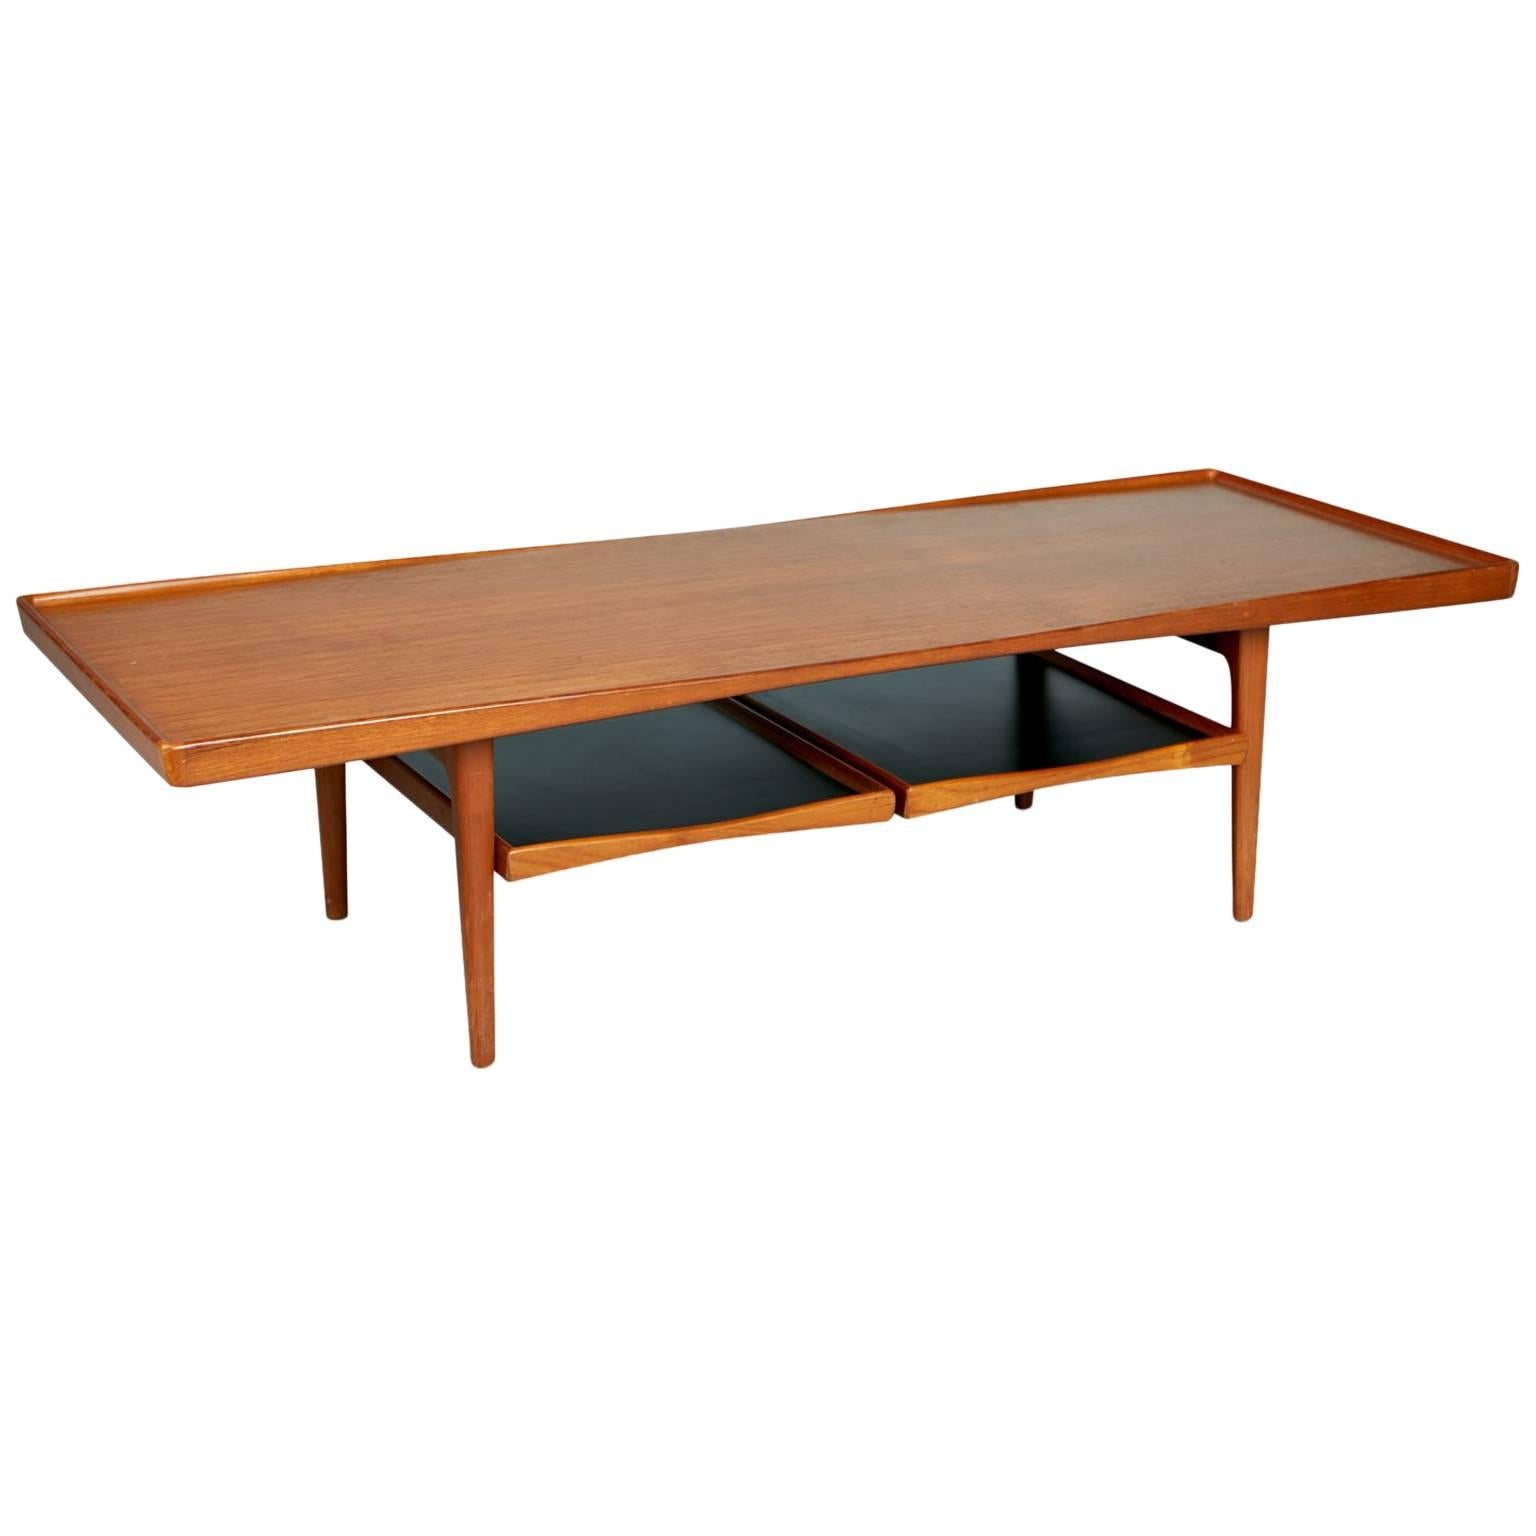 Danish Modern Coffee Table with Removable Trays by Poul Jensen for Selig